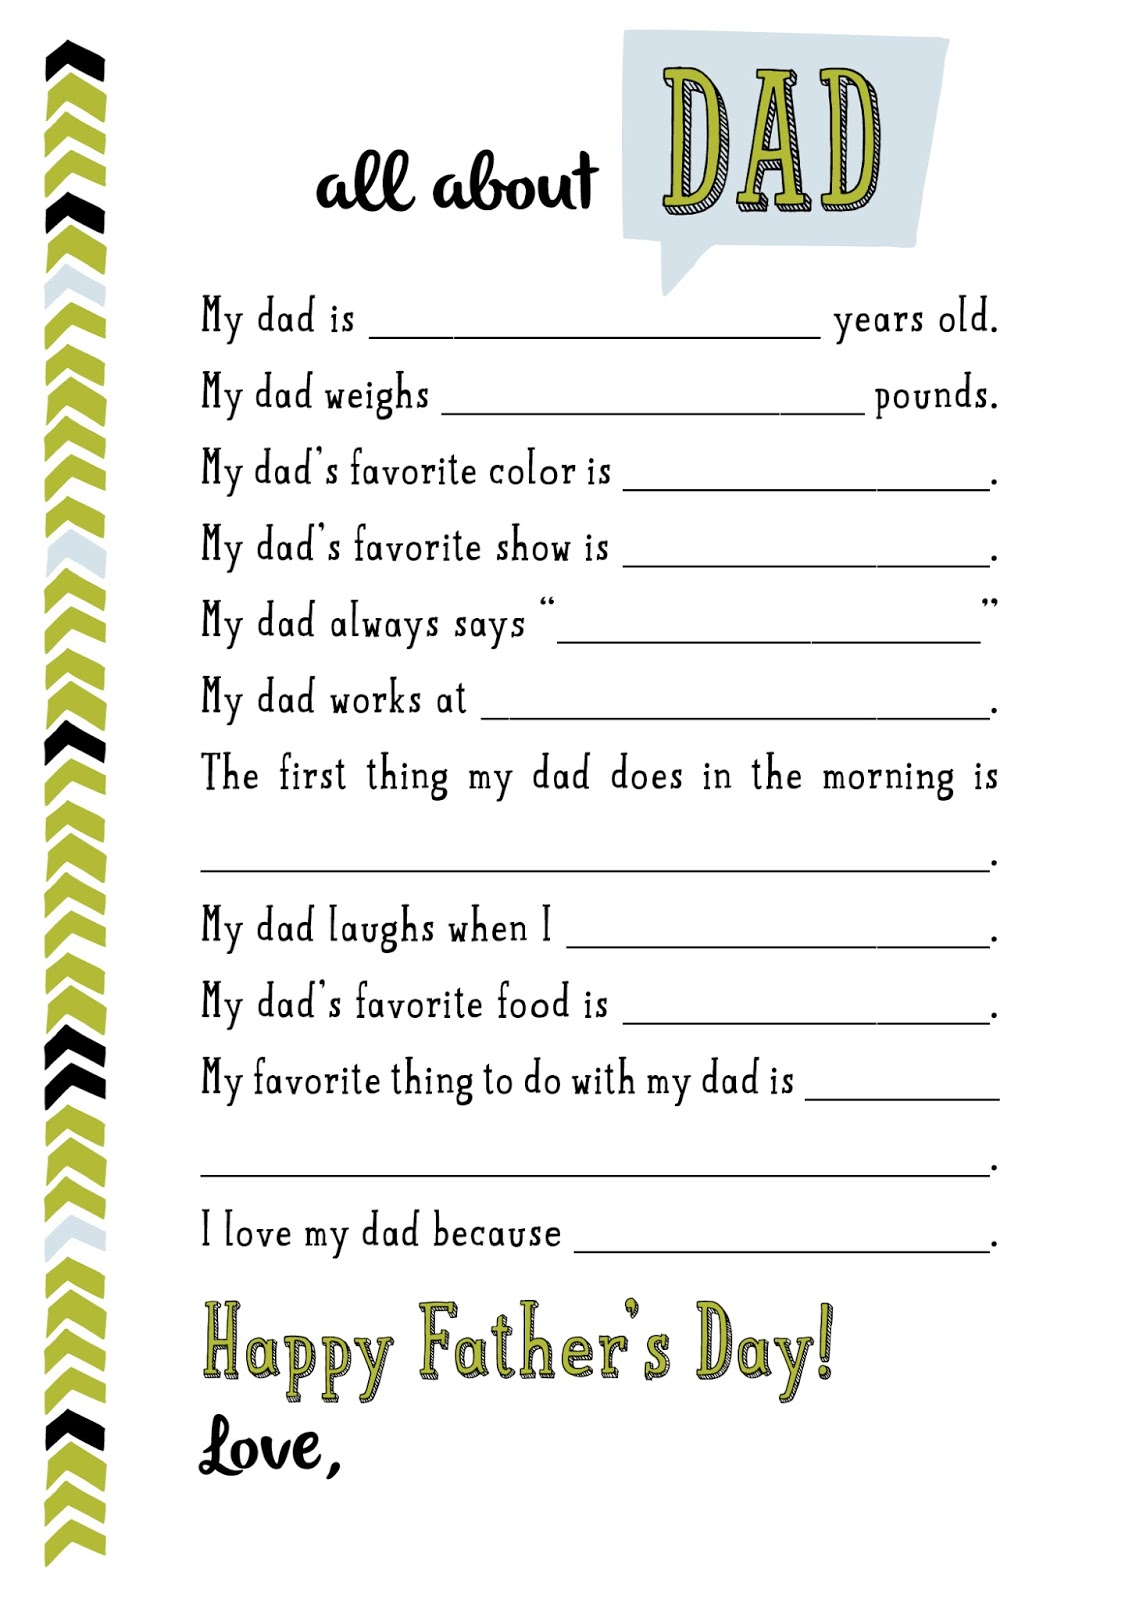 River Bridge All About Dad Free Printable